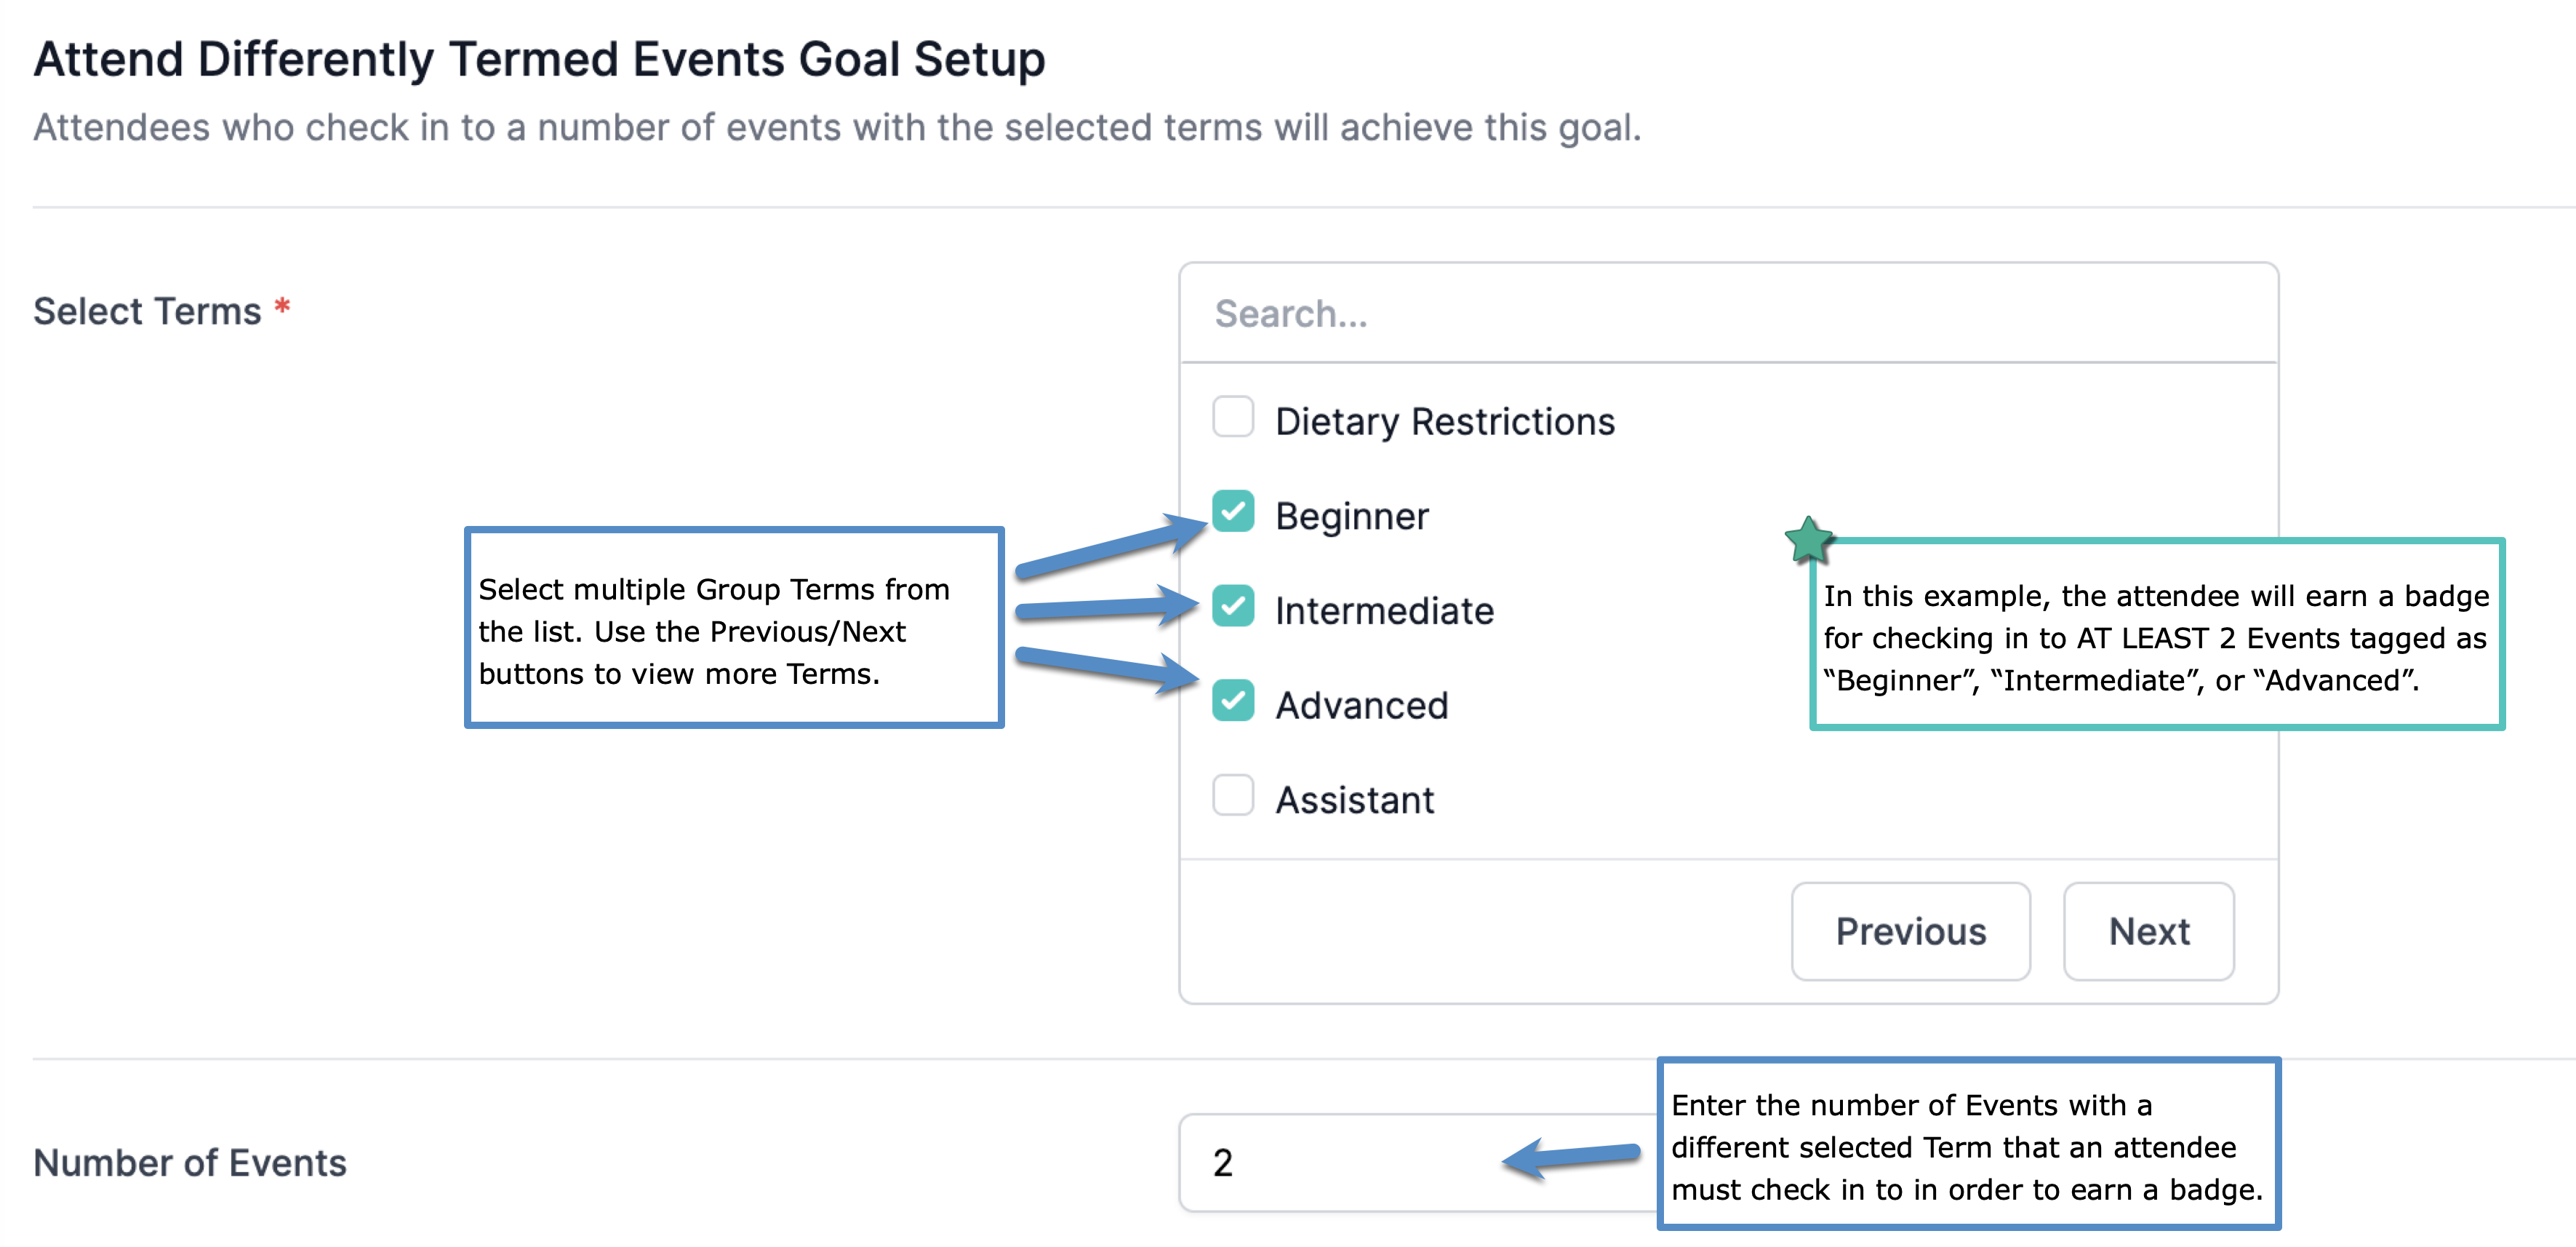 Attend_Differently_Termed_Events_Goal_Setup.png